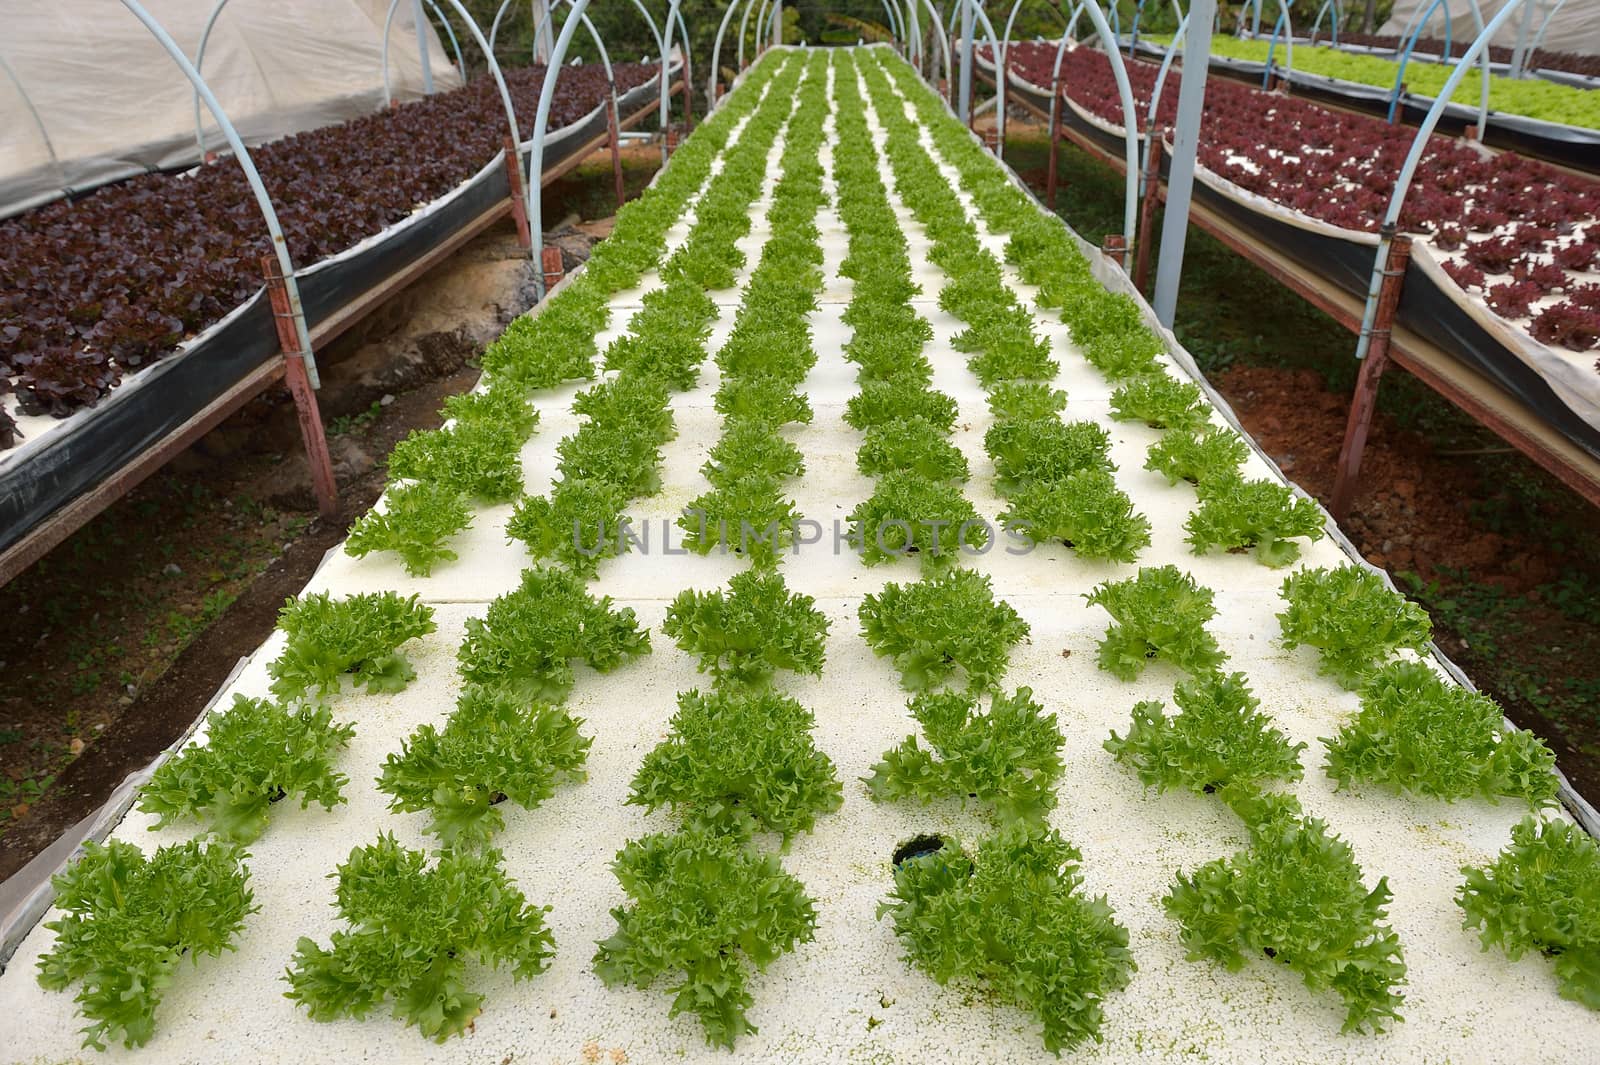 hydroponic farm at Doi Angkhang royal project, Chiangmai, Thaila by think4photop